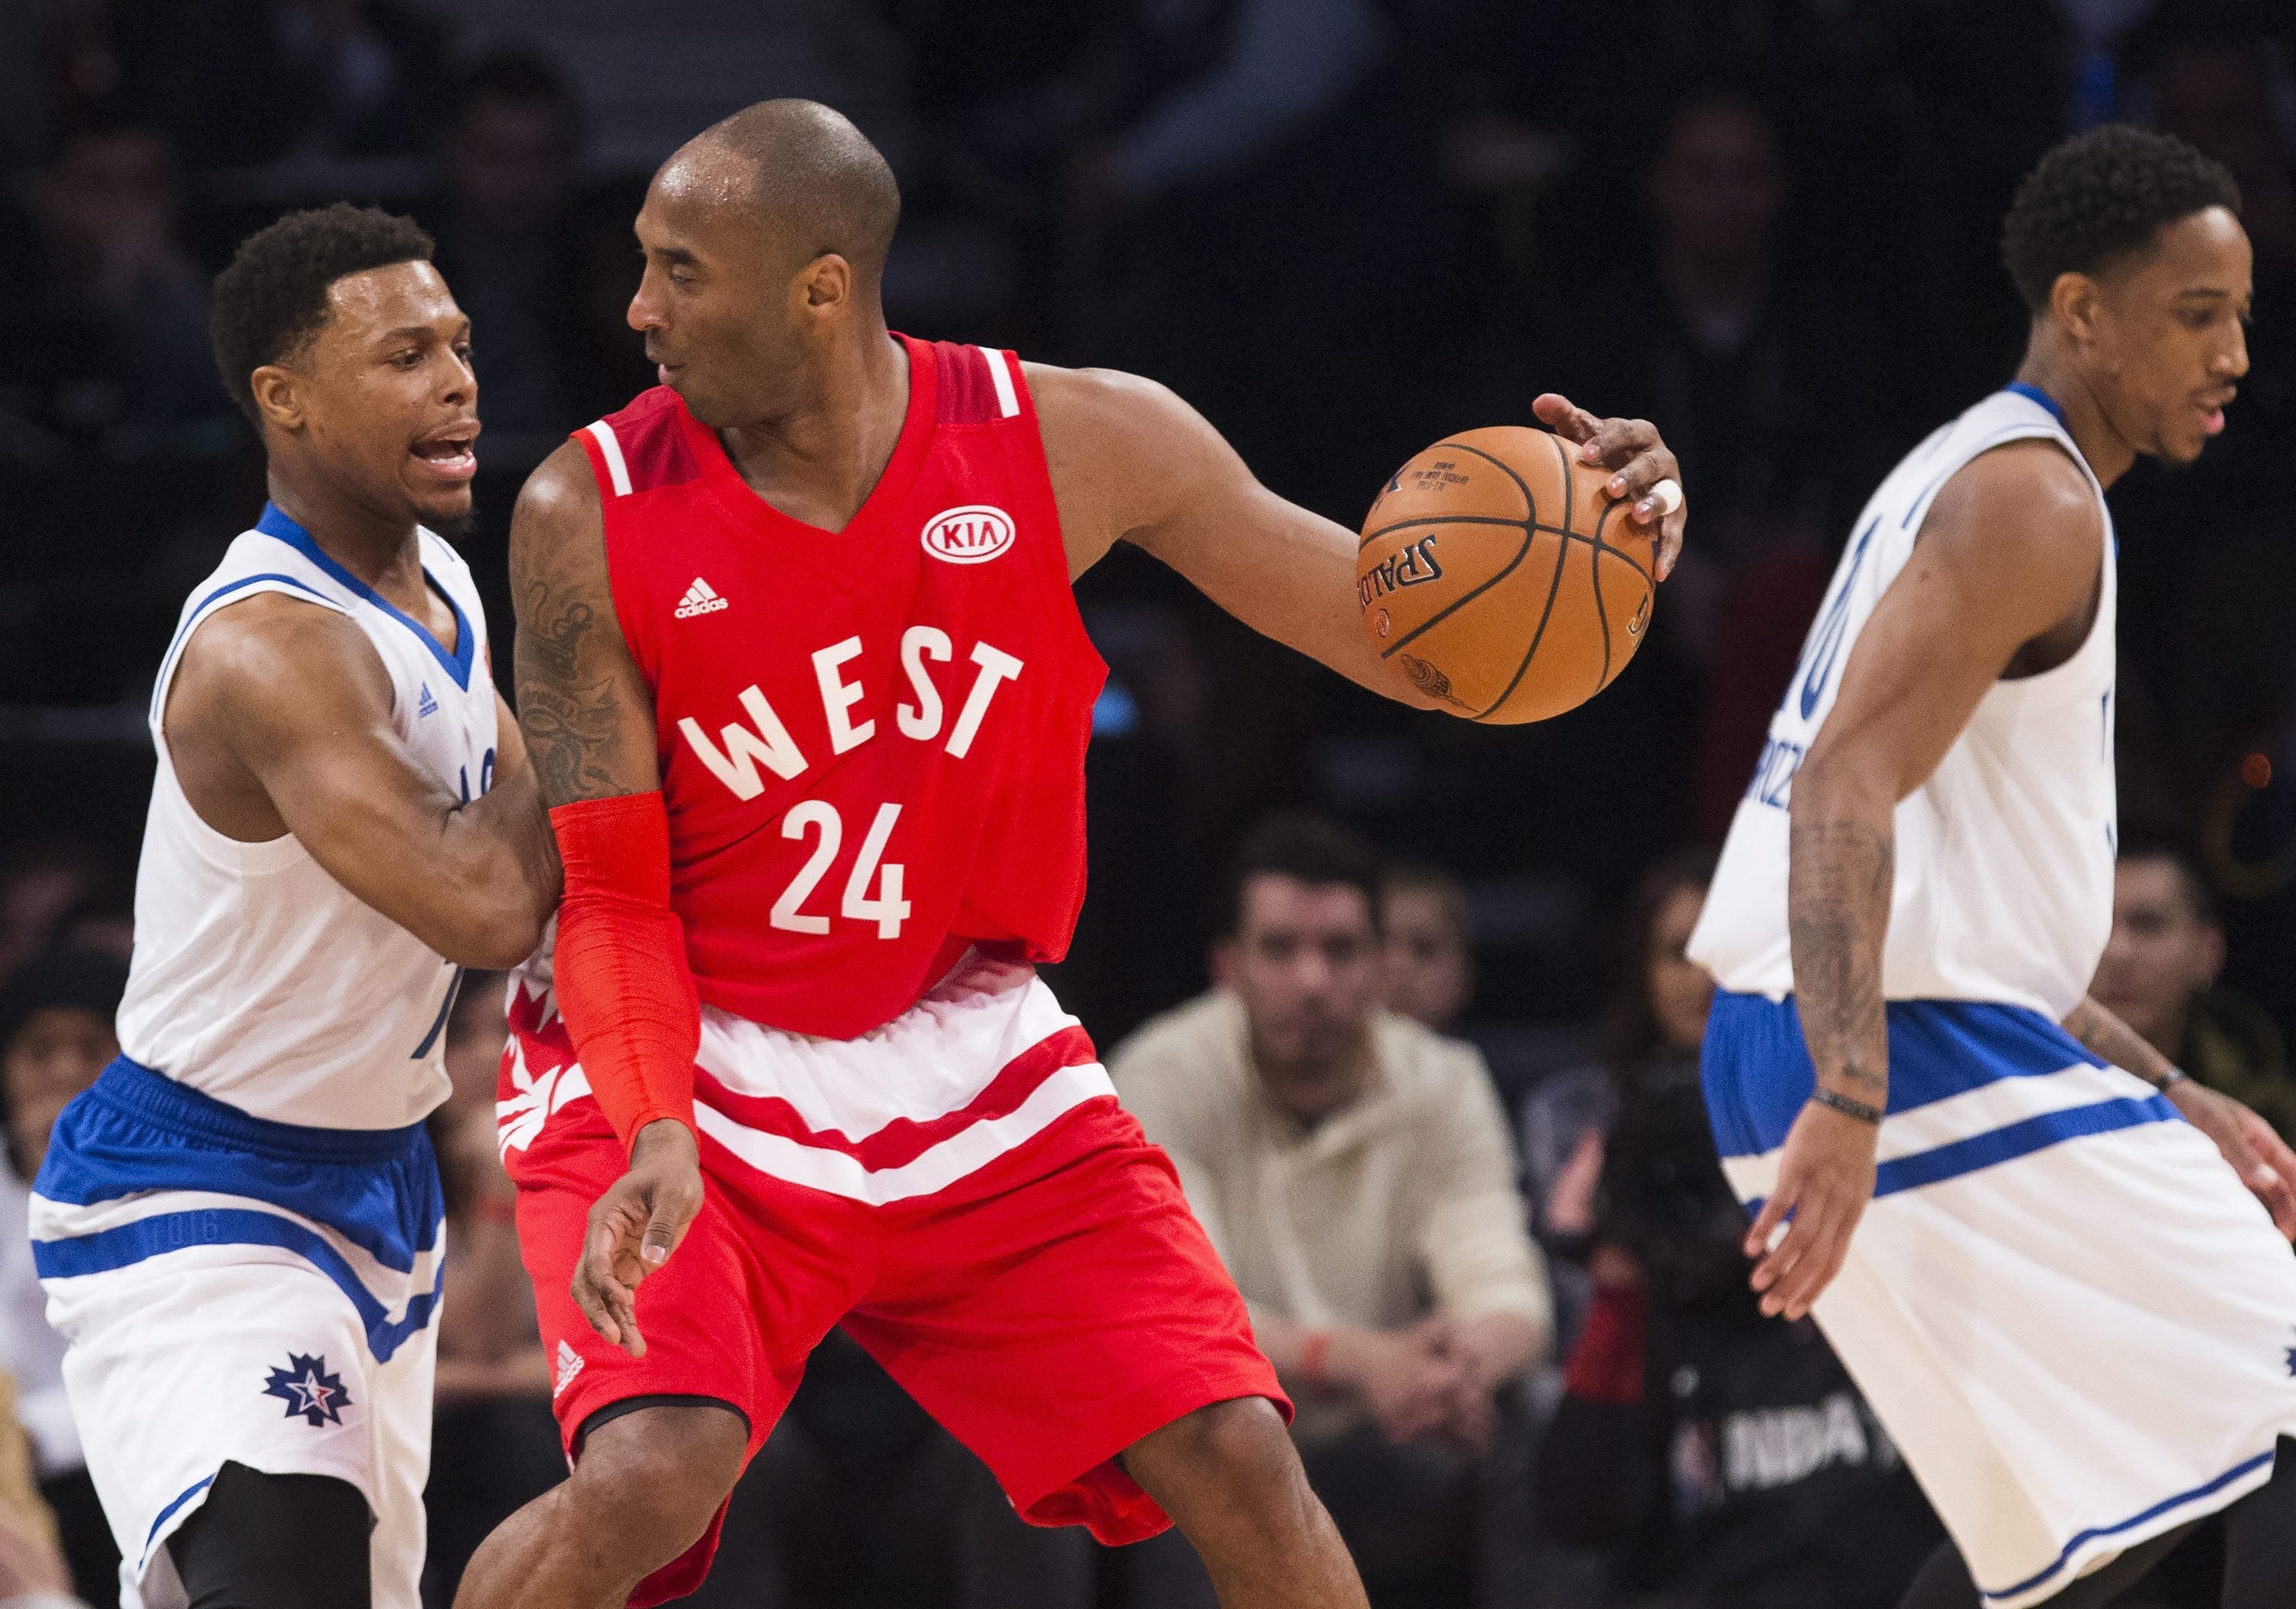 Western Conference's Kobe Bryant, of the Los Angeles Lakers (24) tries to move the ball past Eastern Conference's Kyle Lowry, of the Toronto Raptors, left, during the first half of the NBA all-star basketball game, Sunday, Feb. 14, 2016 in Toronto.